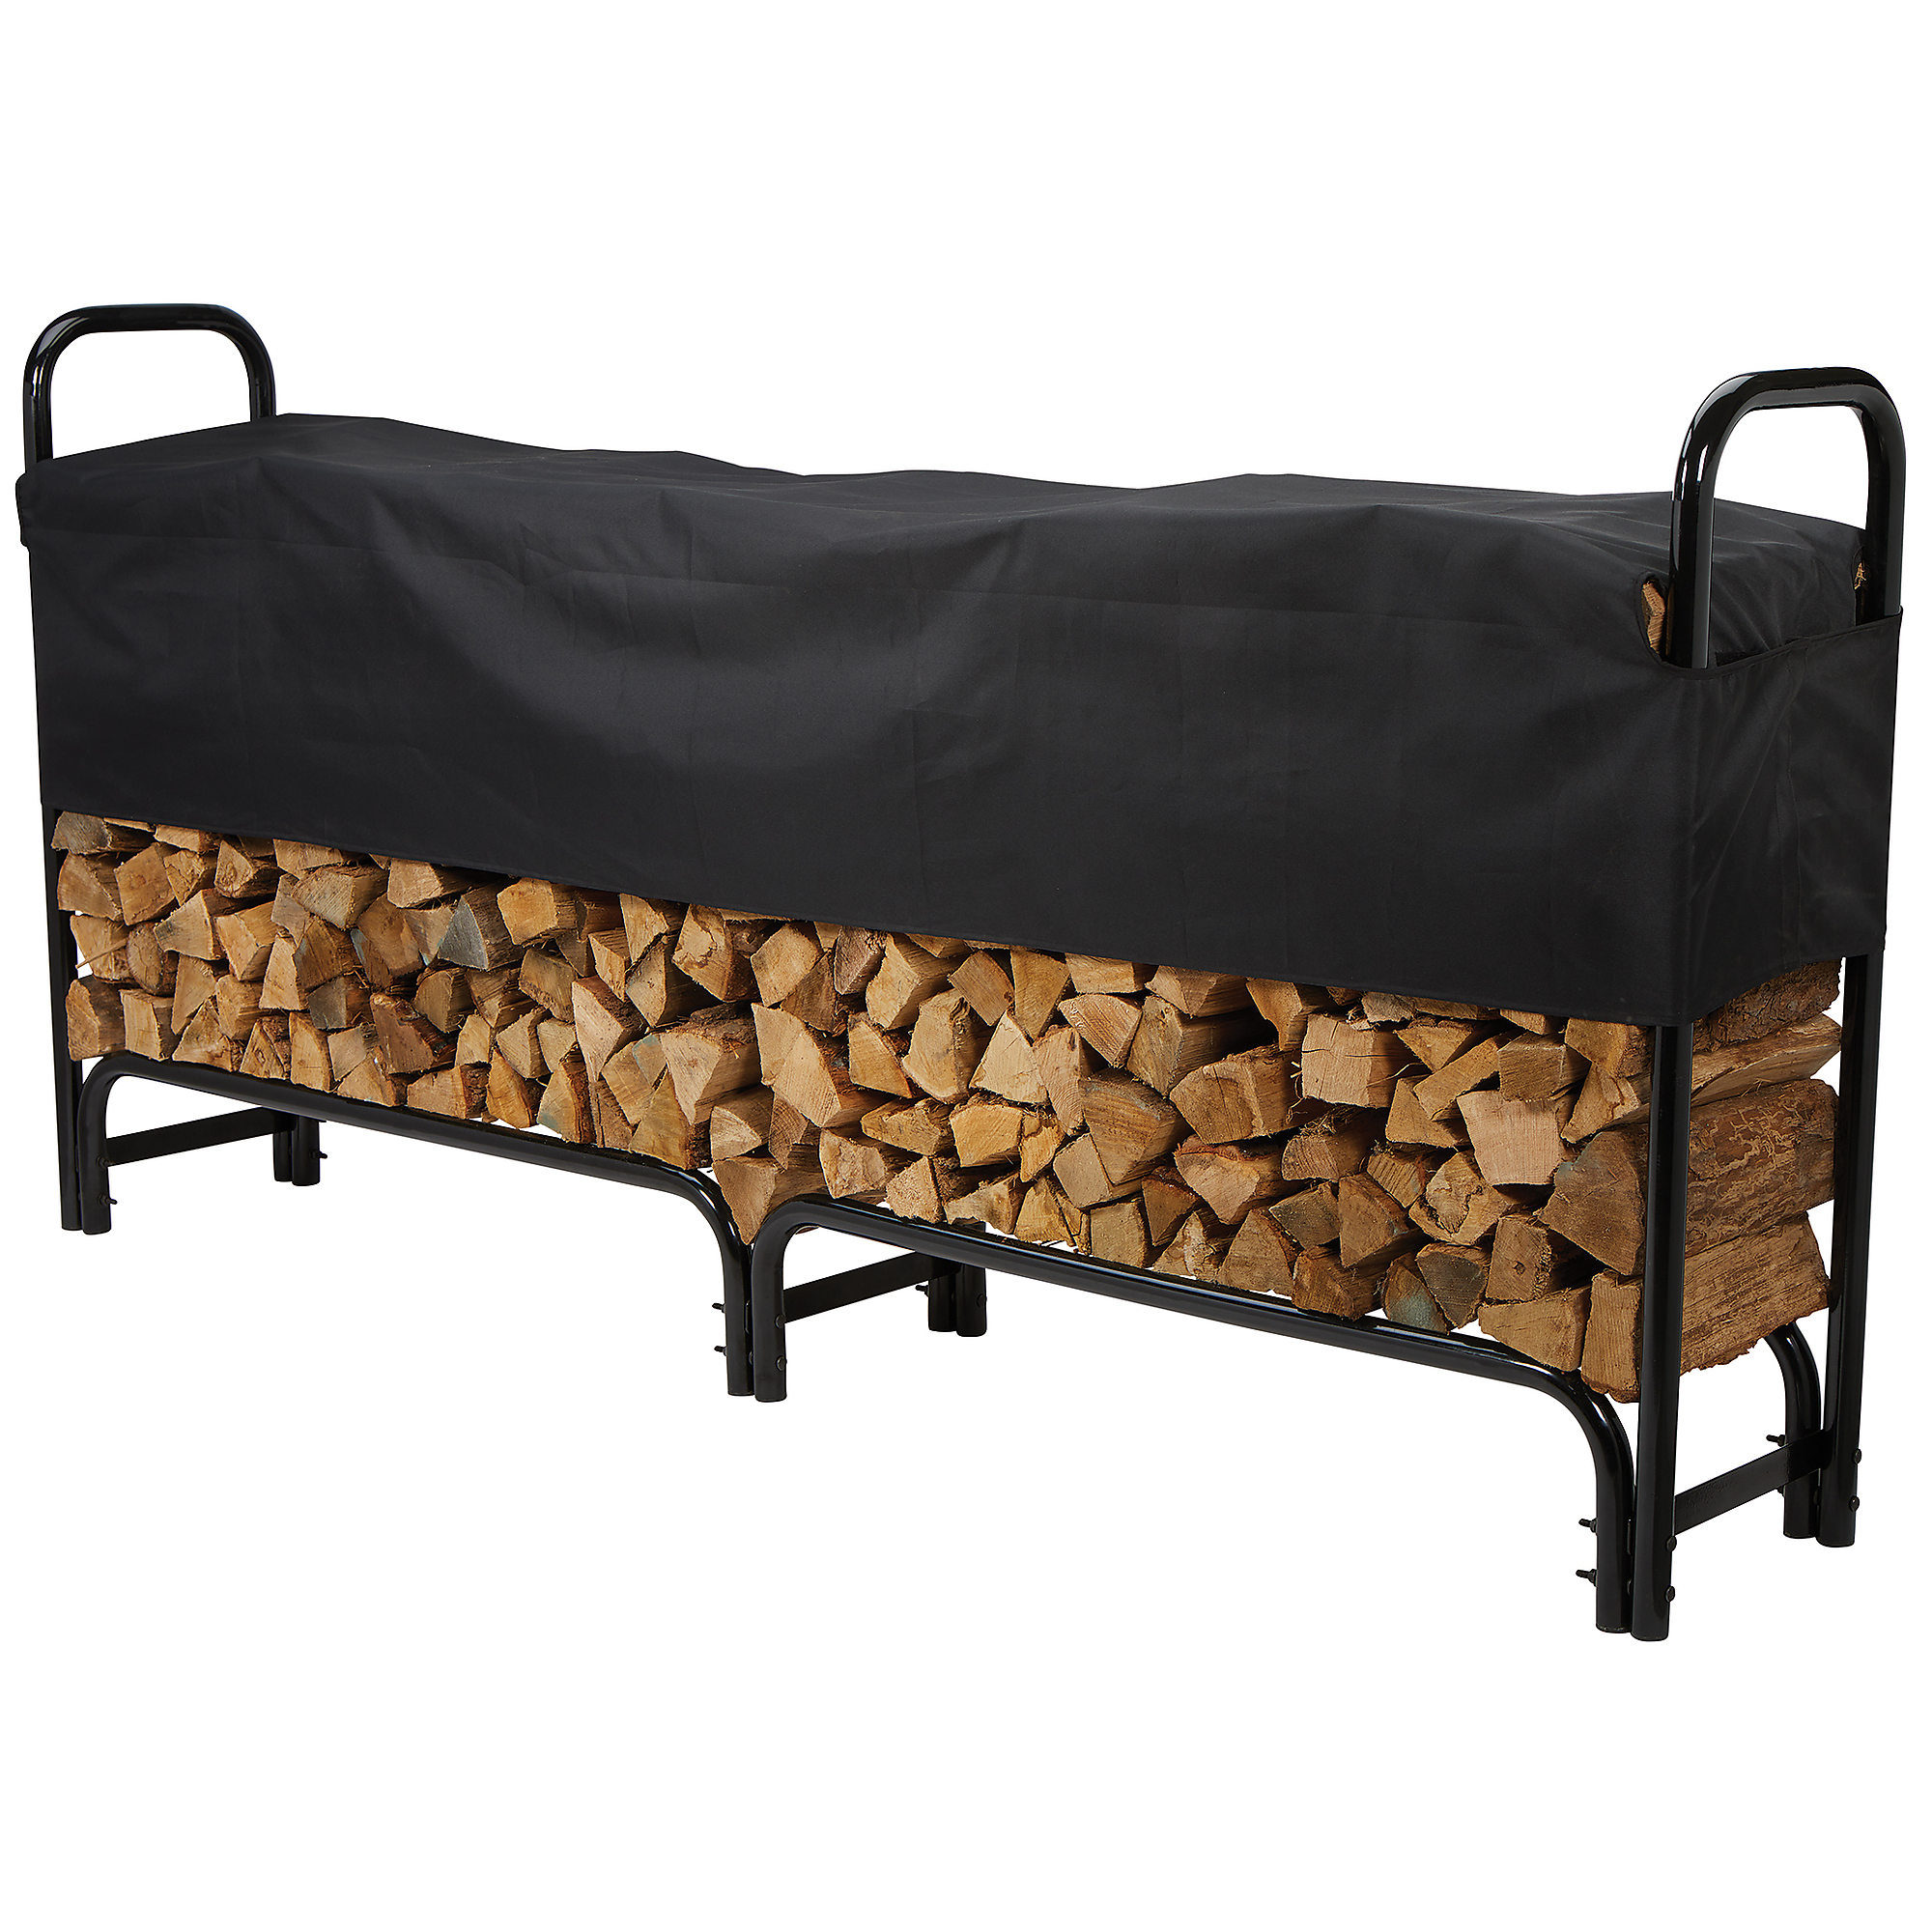 Roughneck 8ft. Firewood Rack with Cover, 2200-Lb. Capacity, Steel Construction, Model 73202208